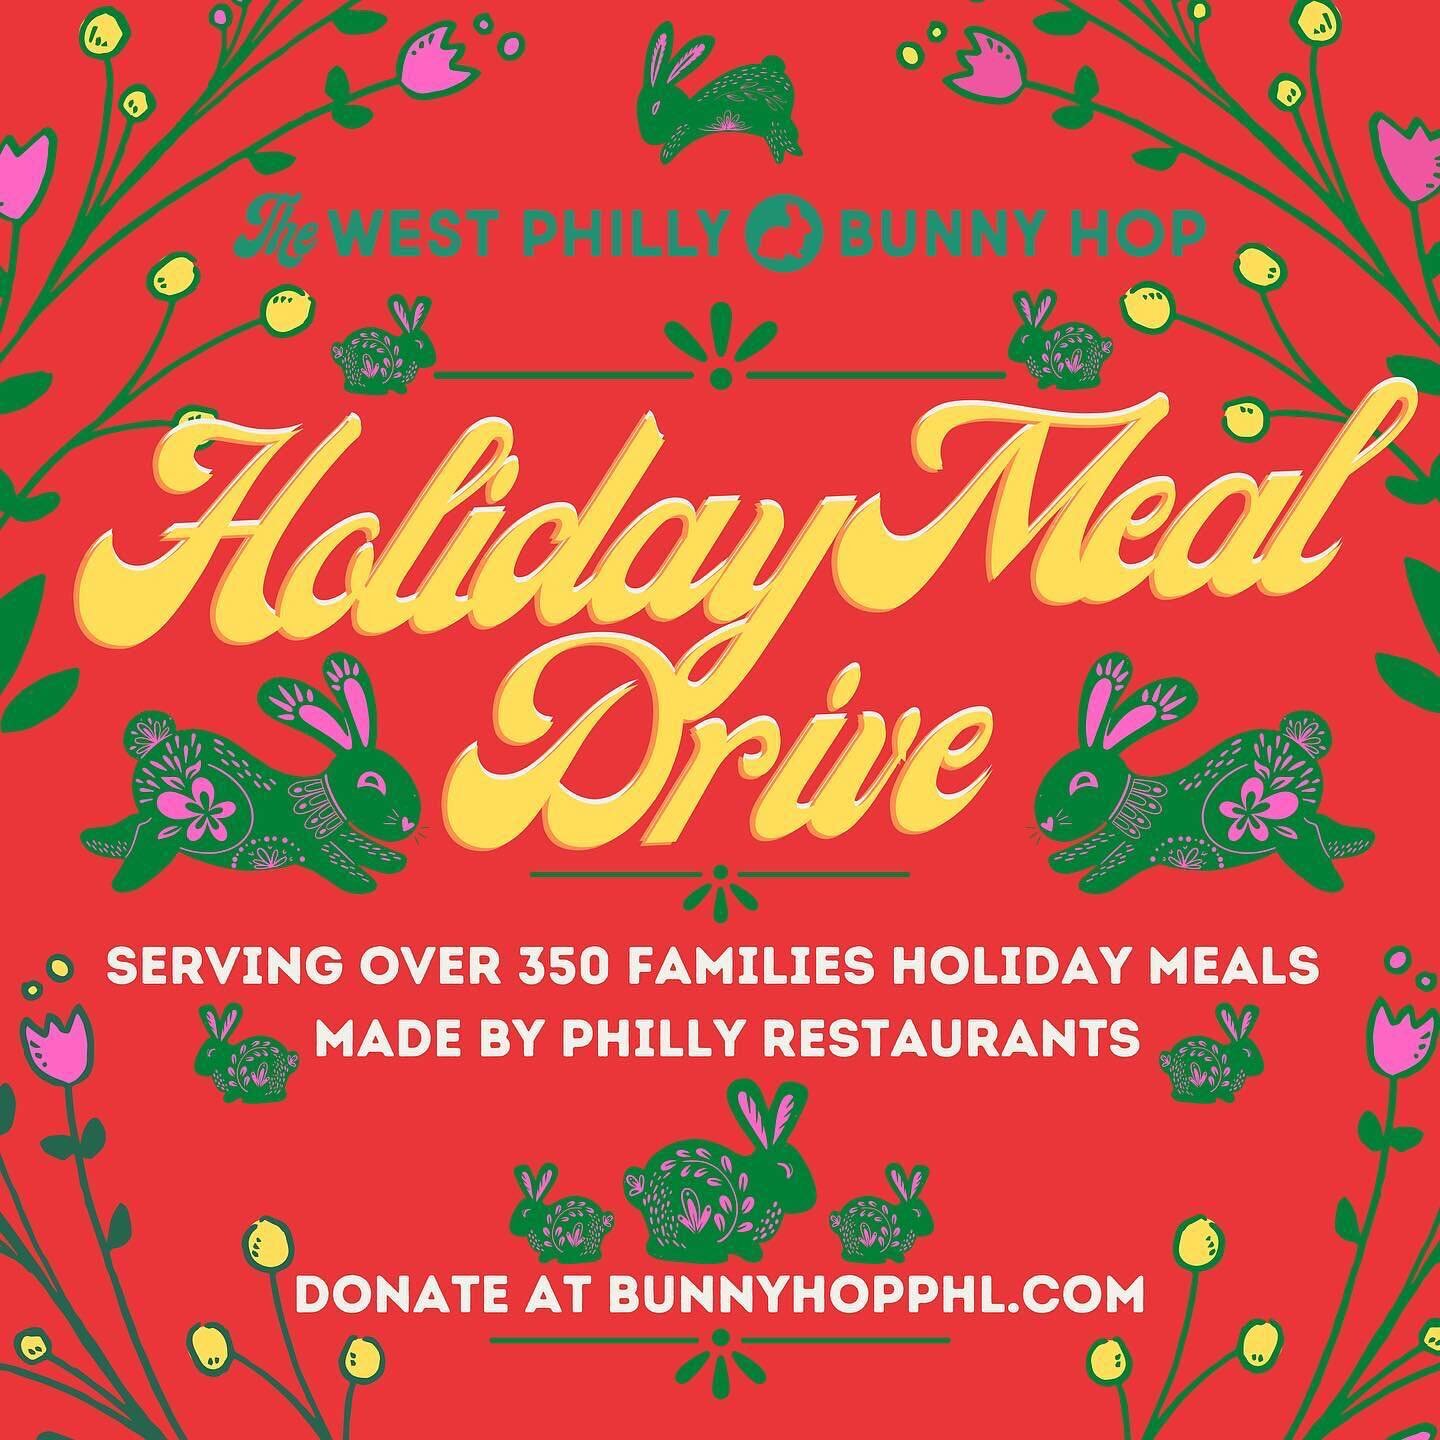 Repost via @bunnyhopphl please share this post!!!! Join our mutual aid effort to feed our 350 Bunny Hop families while supporting Philly Restaurants! Your donations will help us serve our network and maybe even reach our goal of serving over 1000 fam